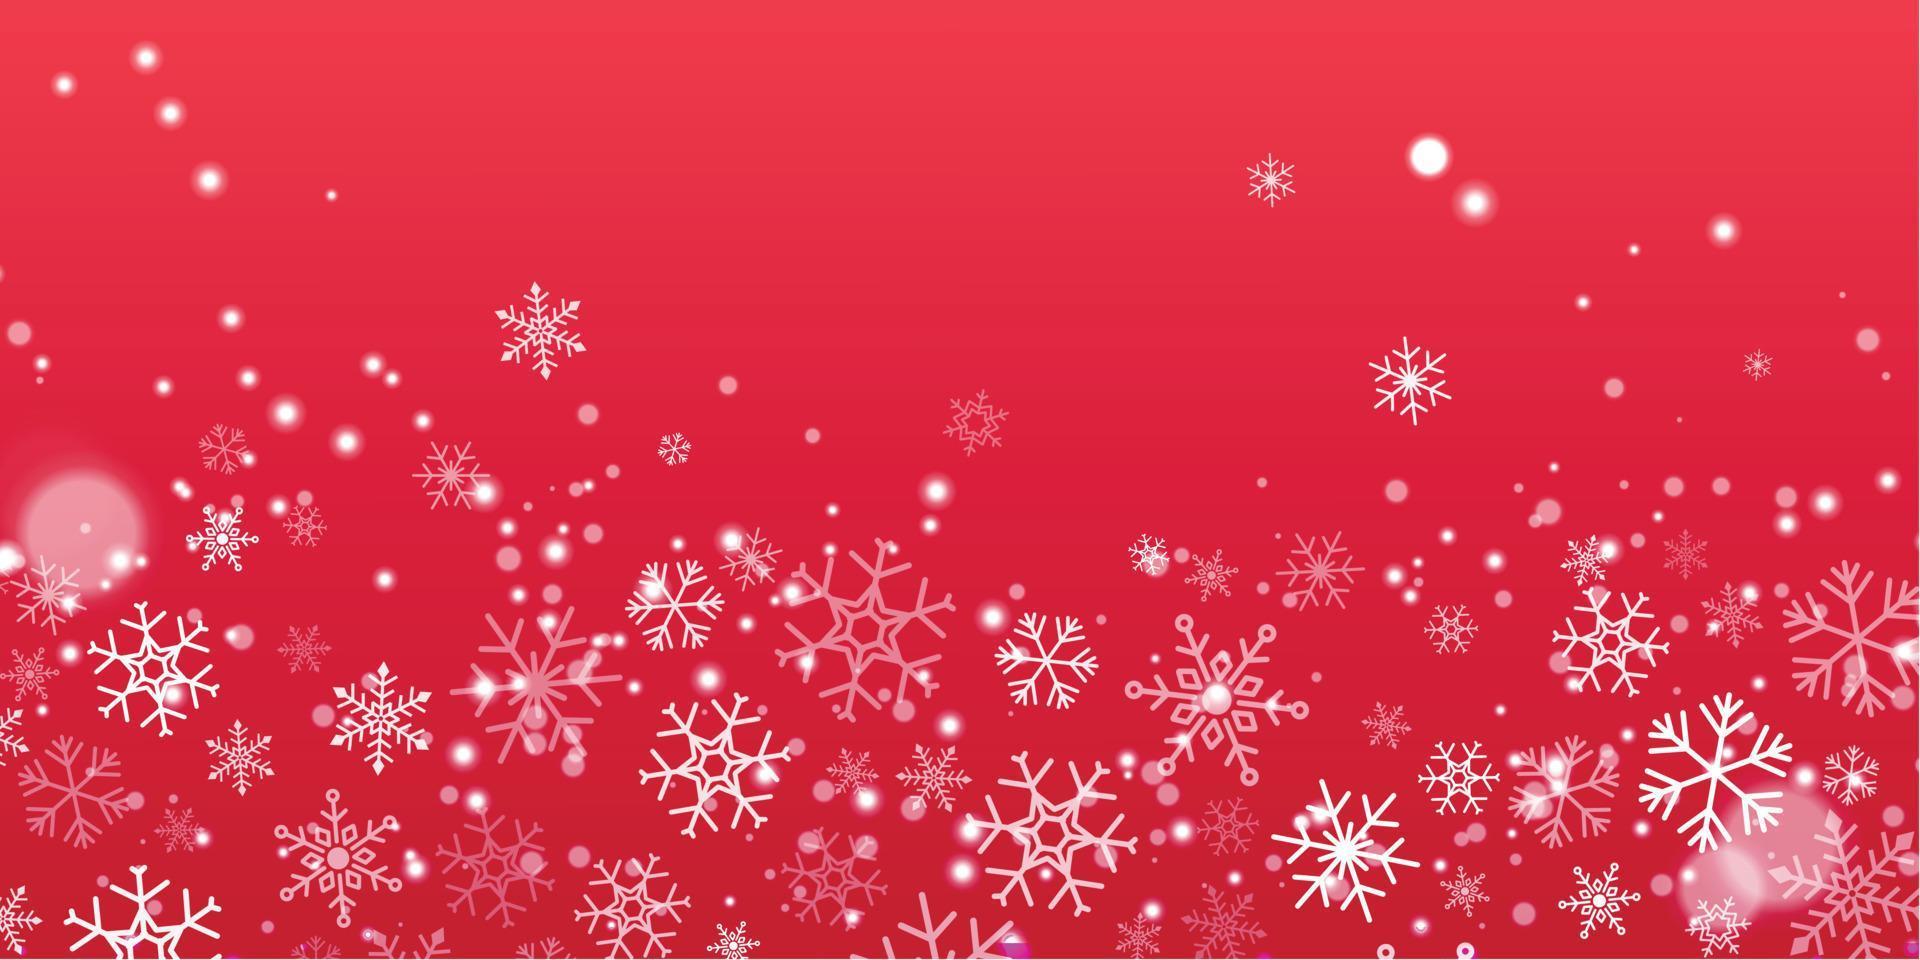 Vector winter holiday snowfall background with white flat line flying snowflakes at the bottom of the banner design